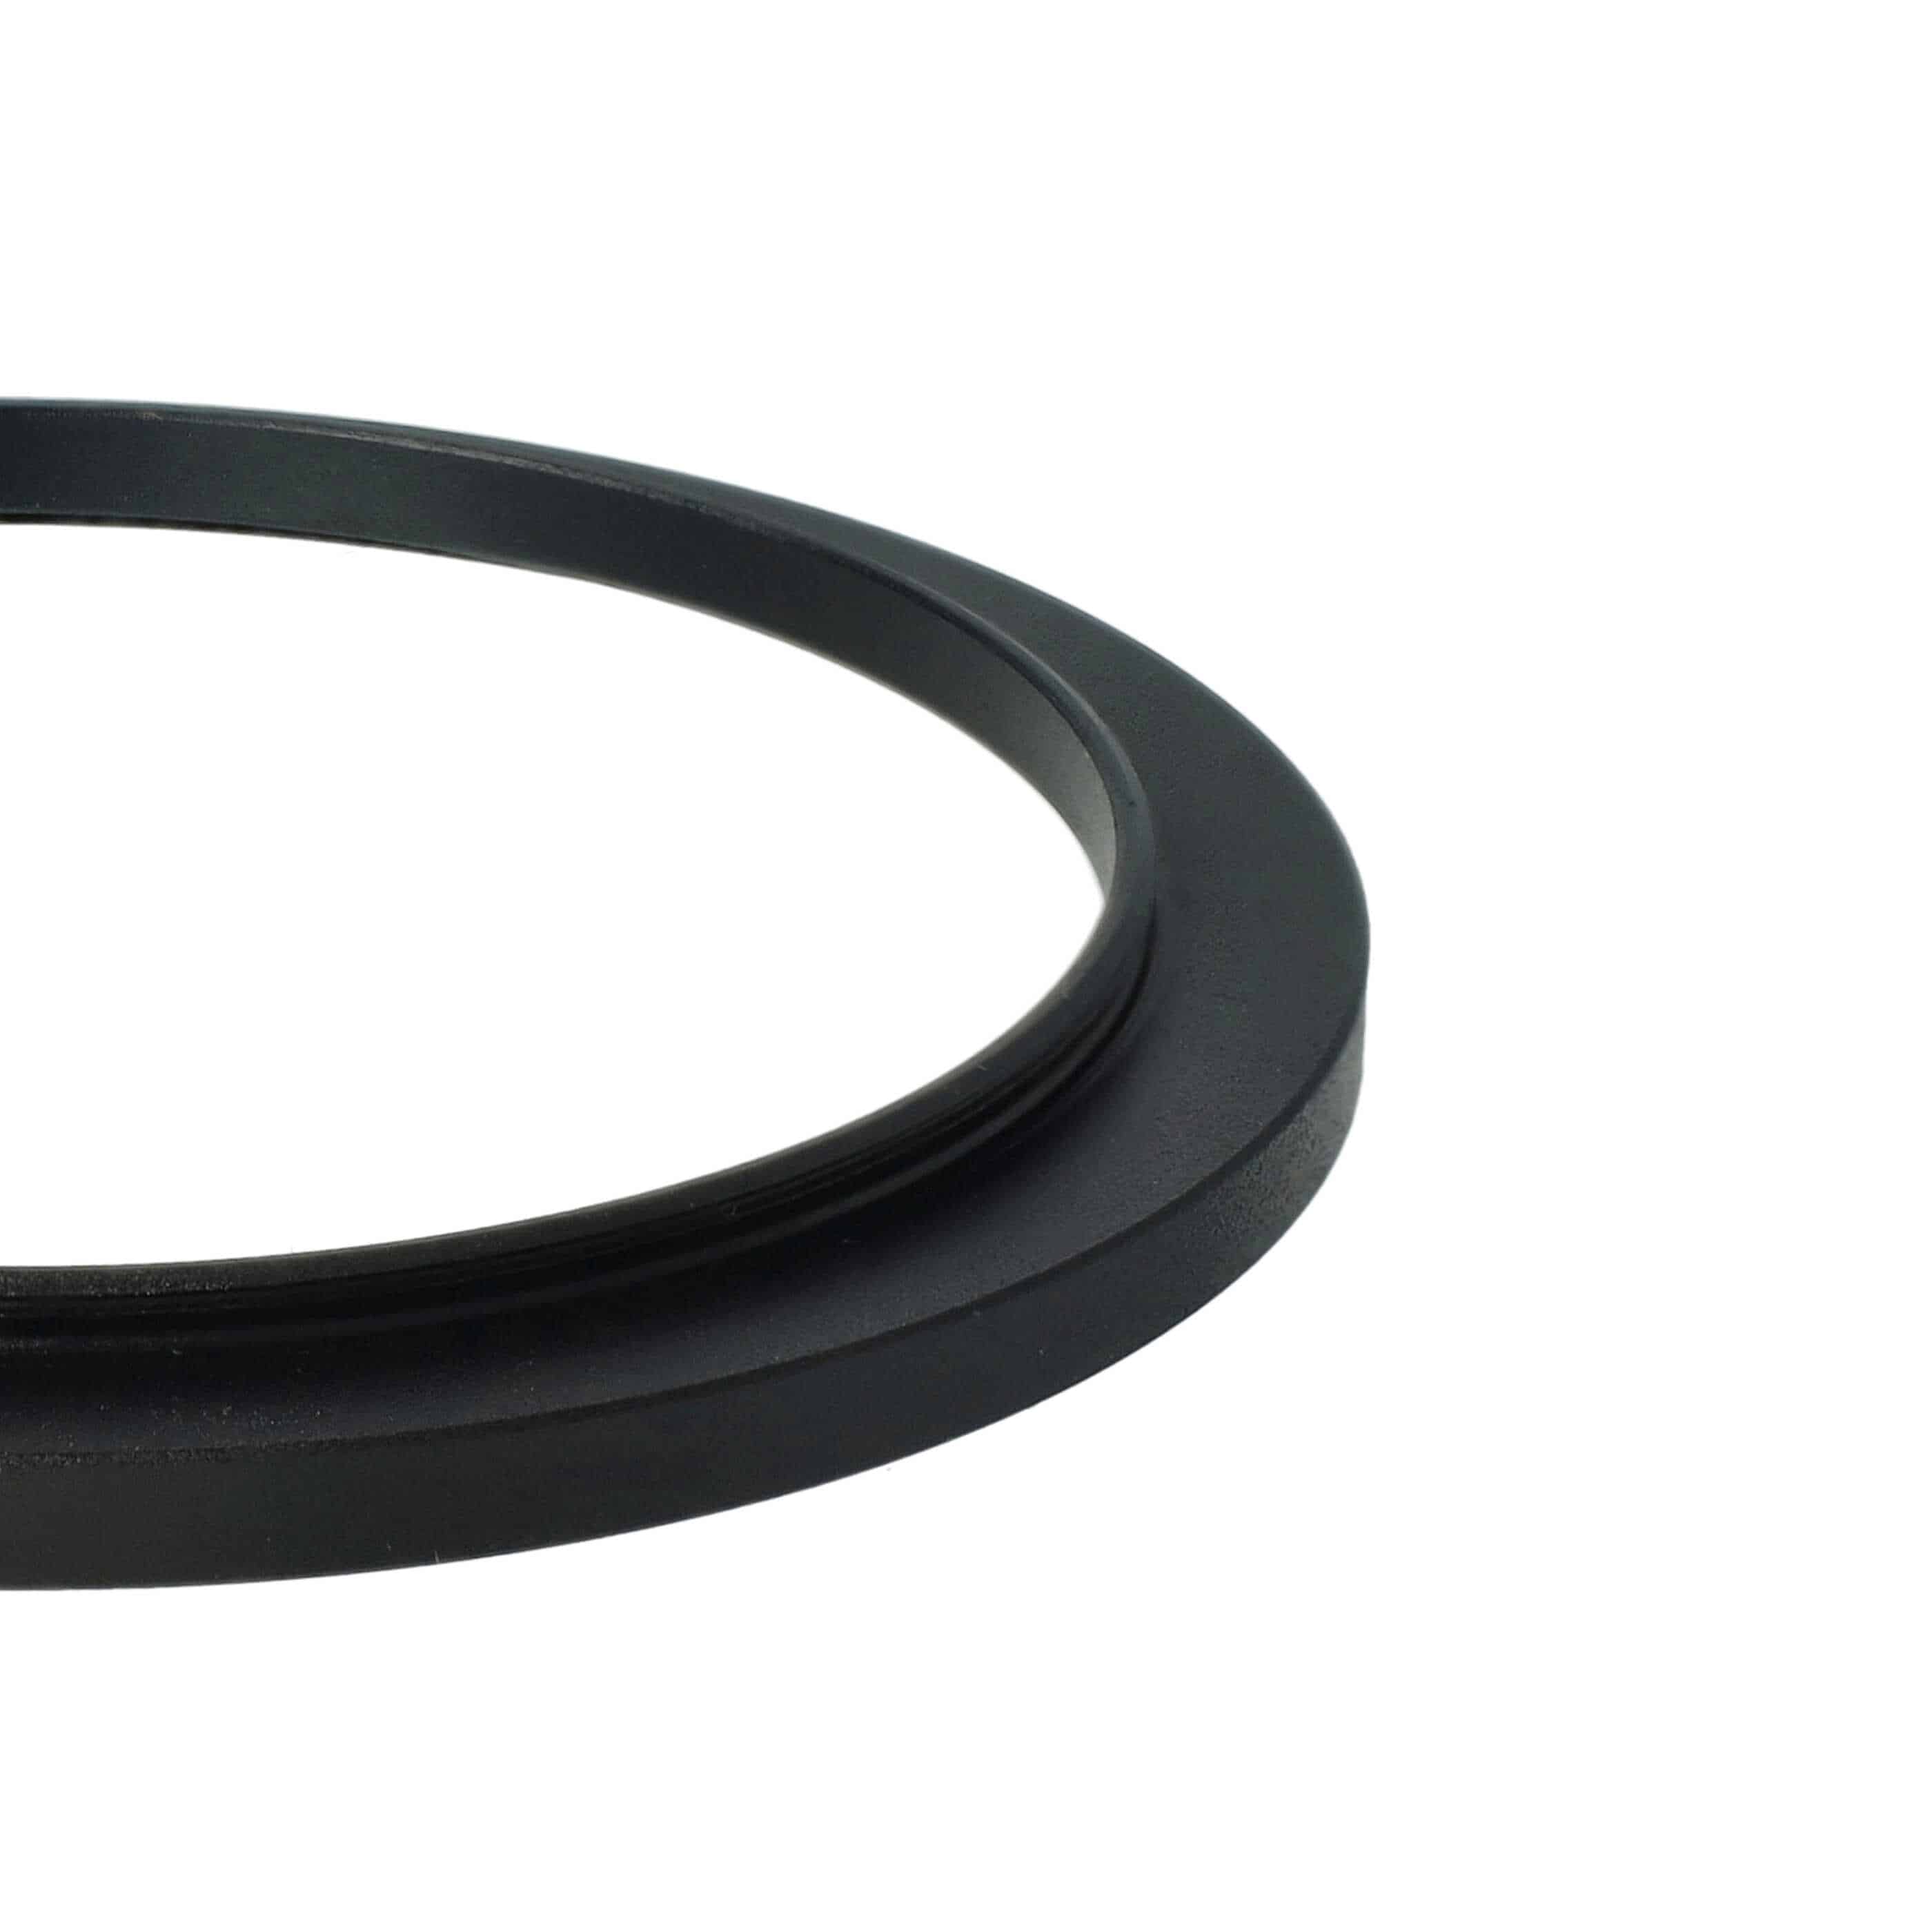 Step-Up Ring Adapter of 67 mm to 77 mmfor various Camera Lens - Filter Adapter